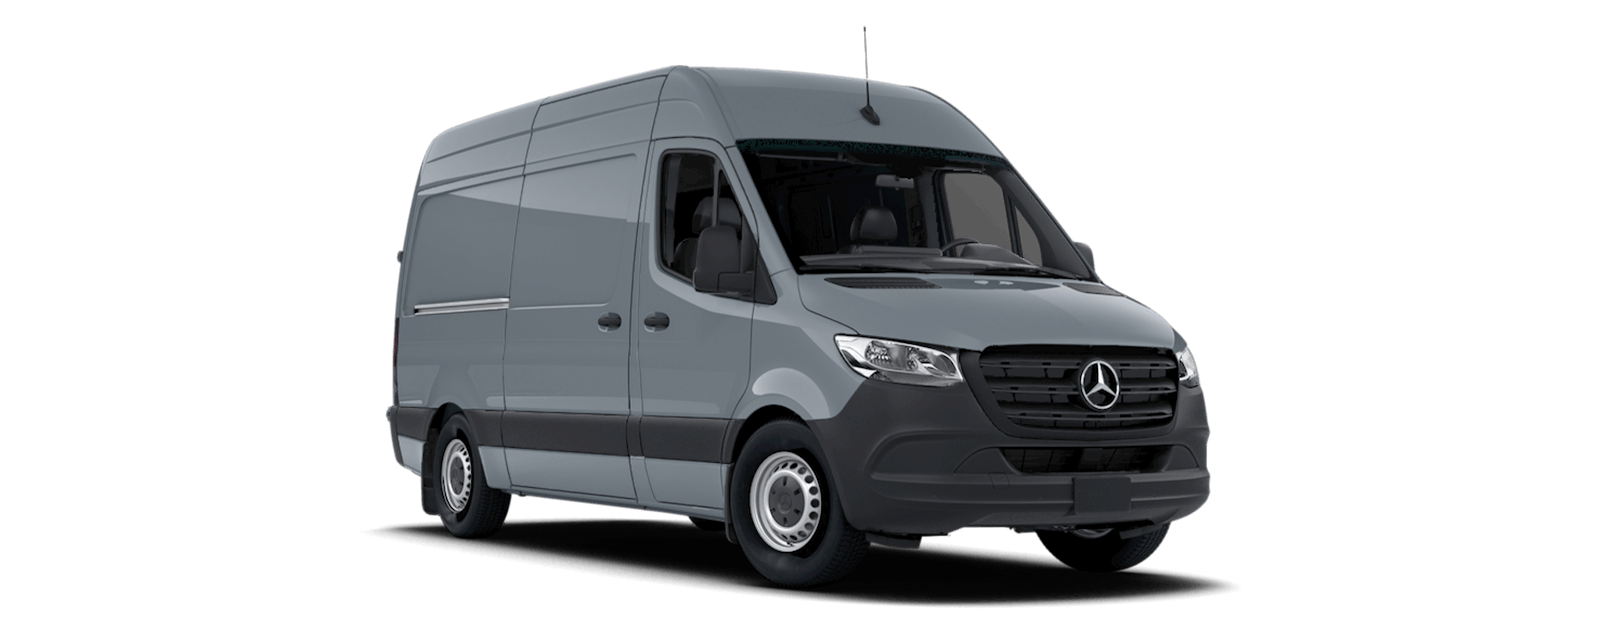 2022 Thor Sanctuary Tranquility Mercedes Sprinter Van 2500 Chassis Blue Grey Exterior key feature